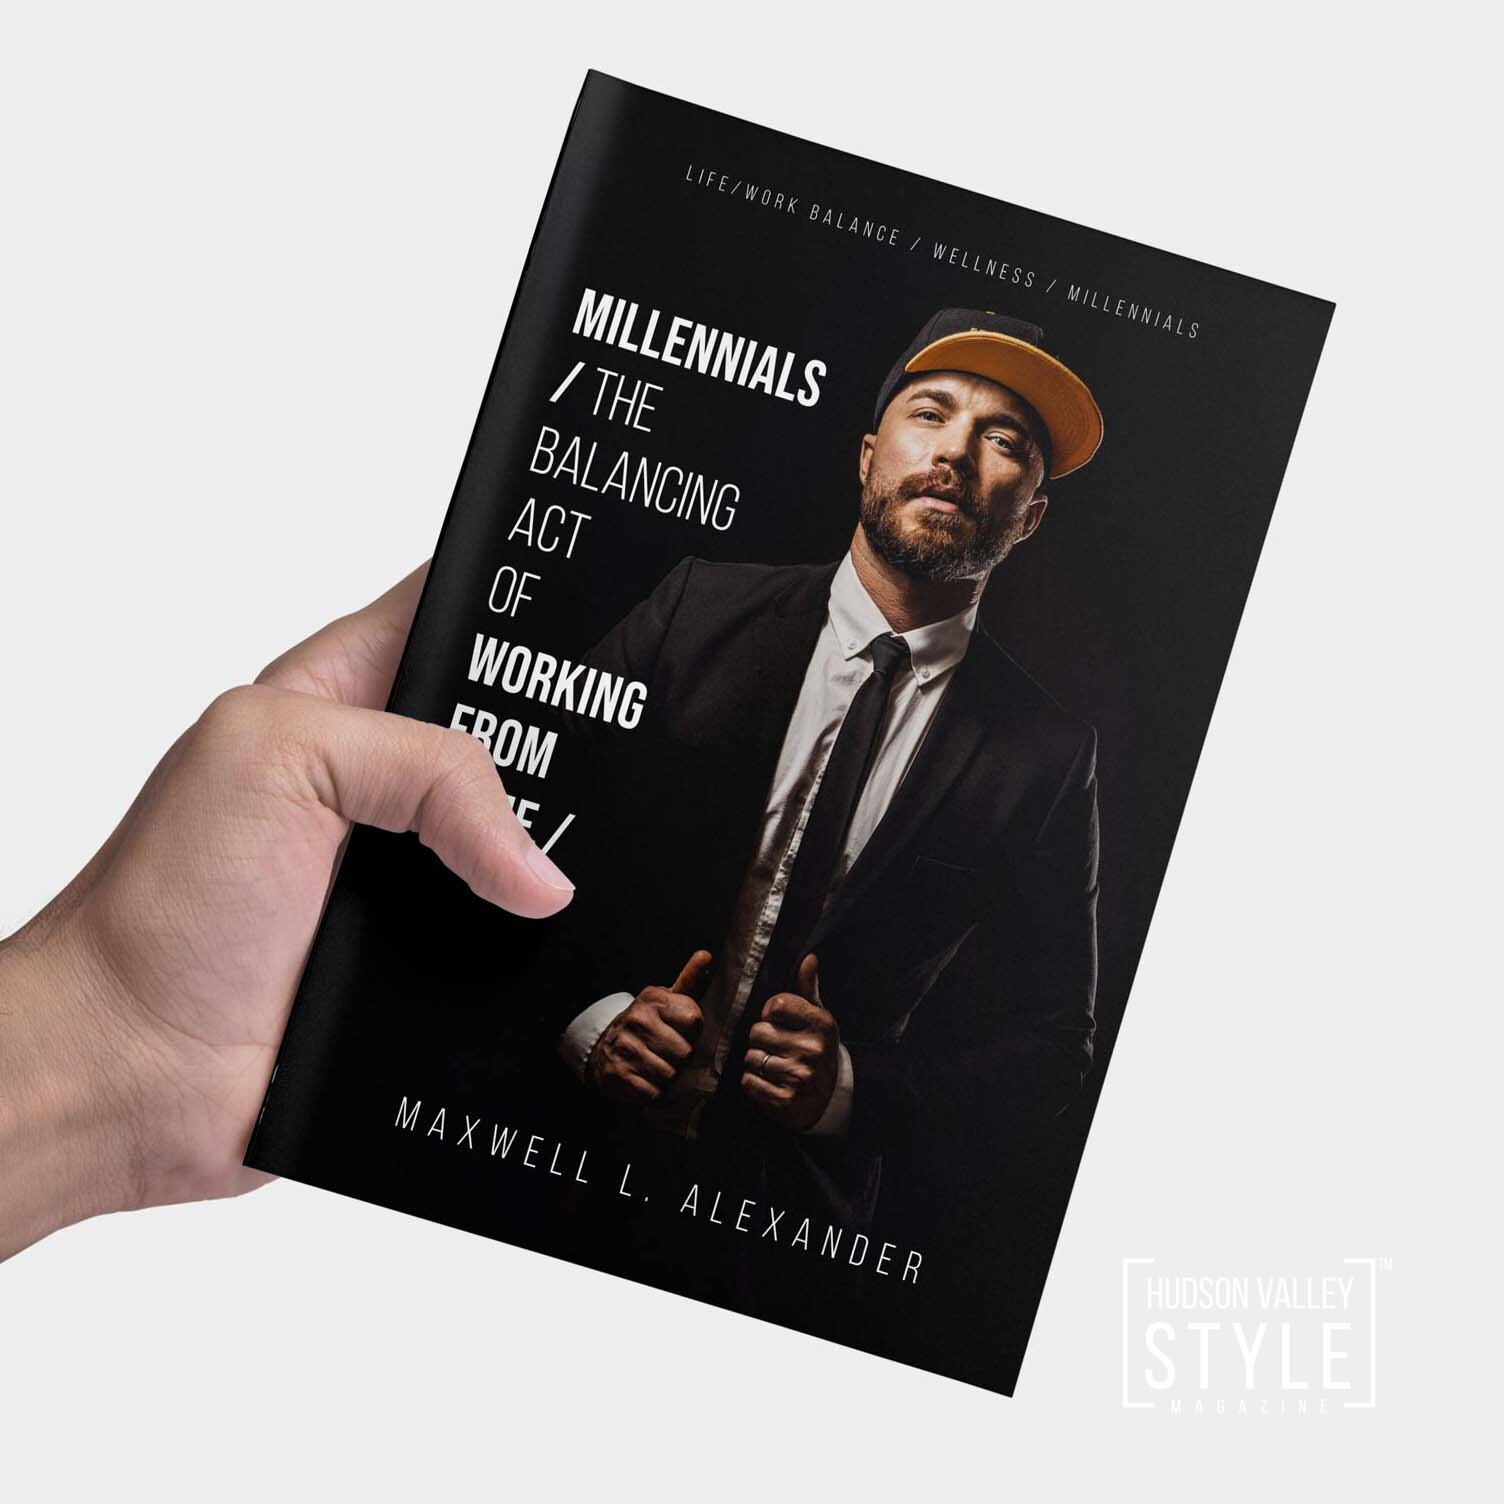 Work from Home: Starting the Journey of Claiming Your Freedom – Presented by Maxwell Alexander and his new book "Millennials – The Balancing Act of Working from Home" on Amazon Kindle